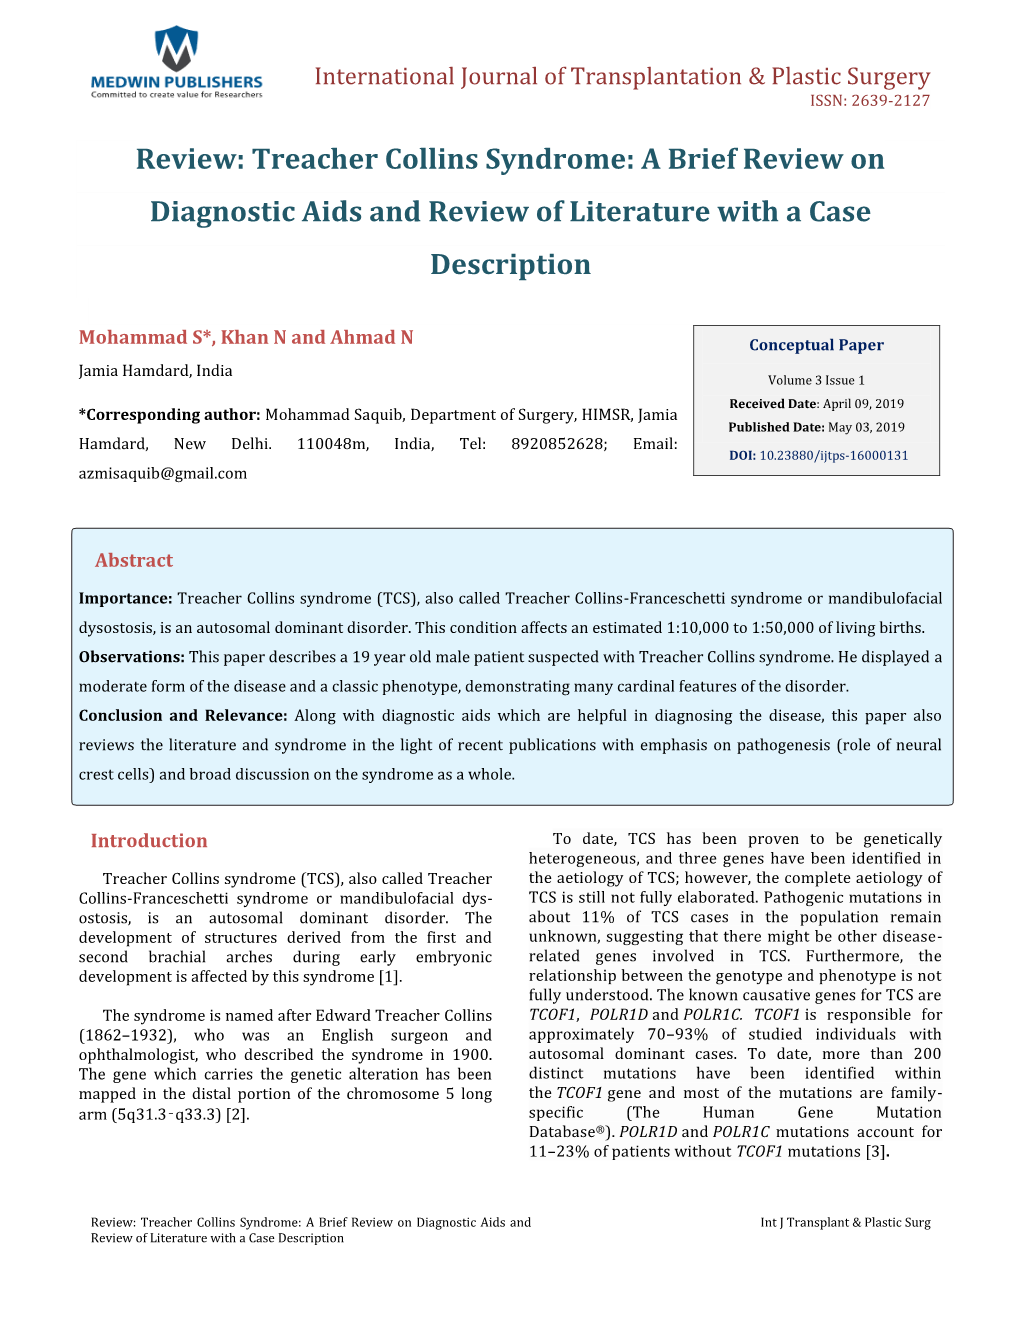 Treacher Collins Syndrome: a Brief Review on Diagnostic Aids and Review of Literature with a Case Description